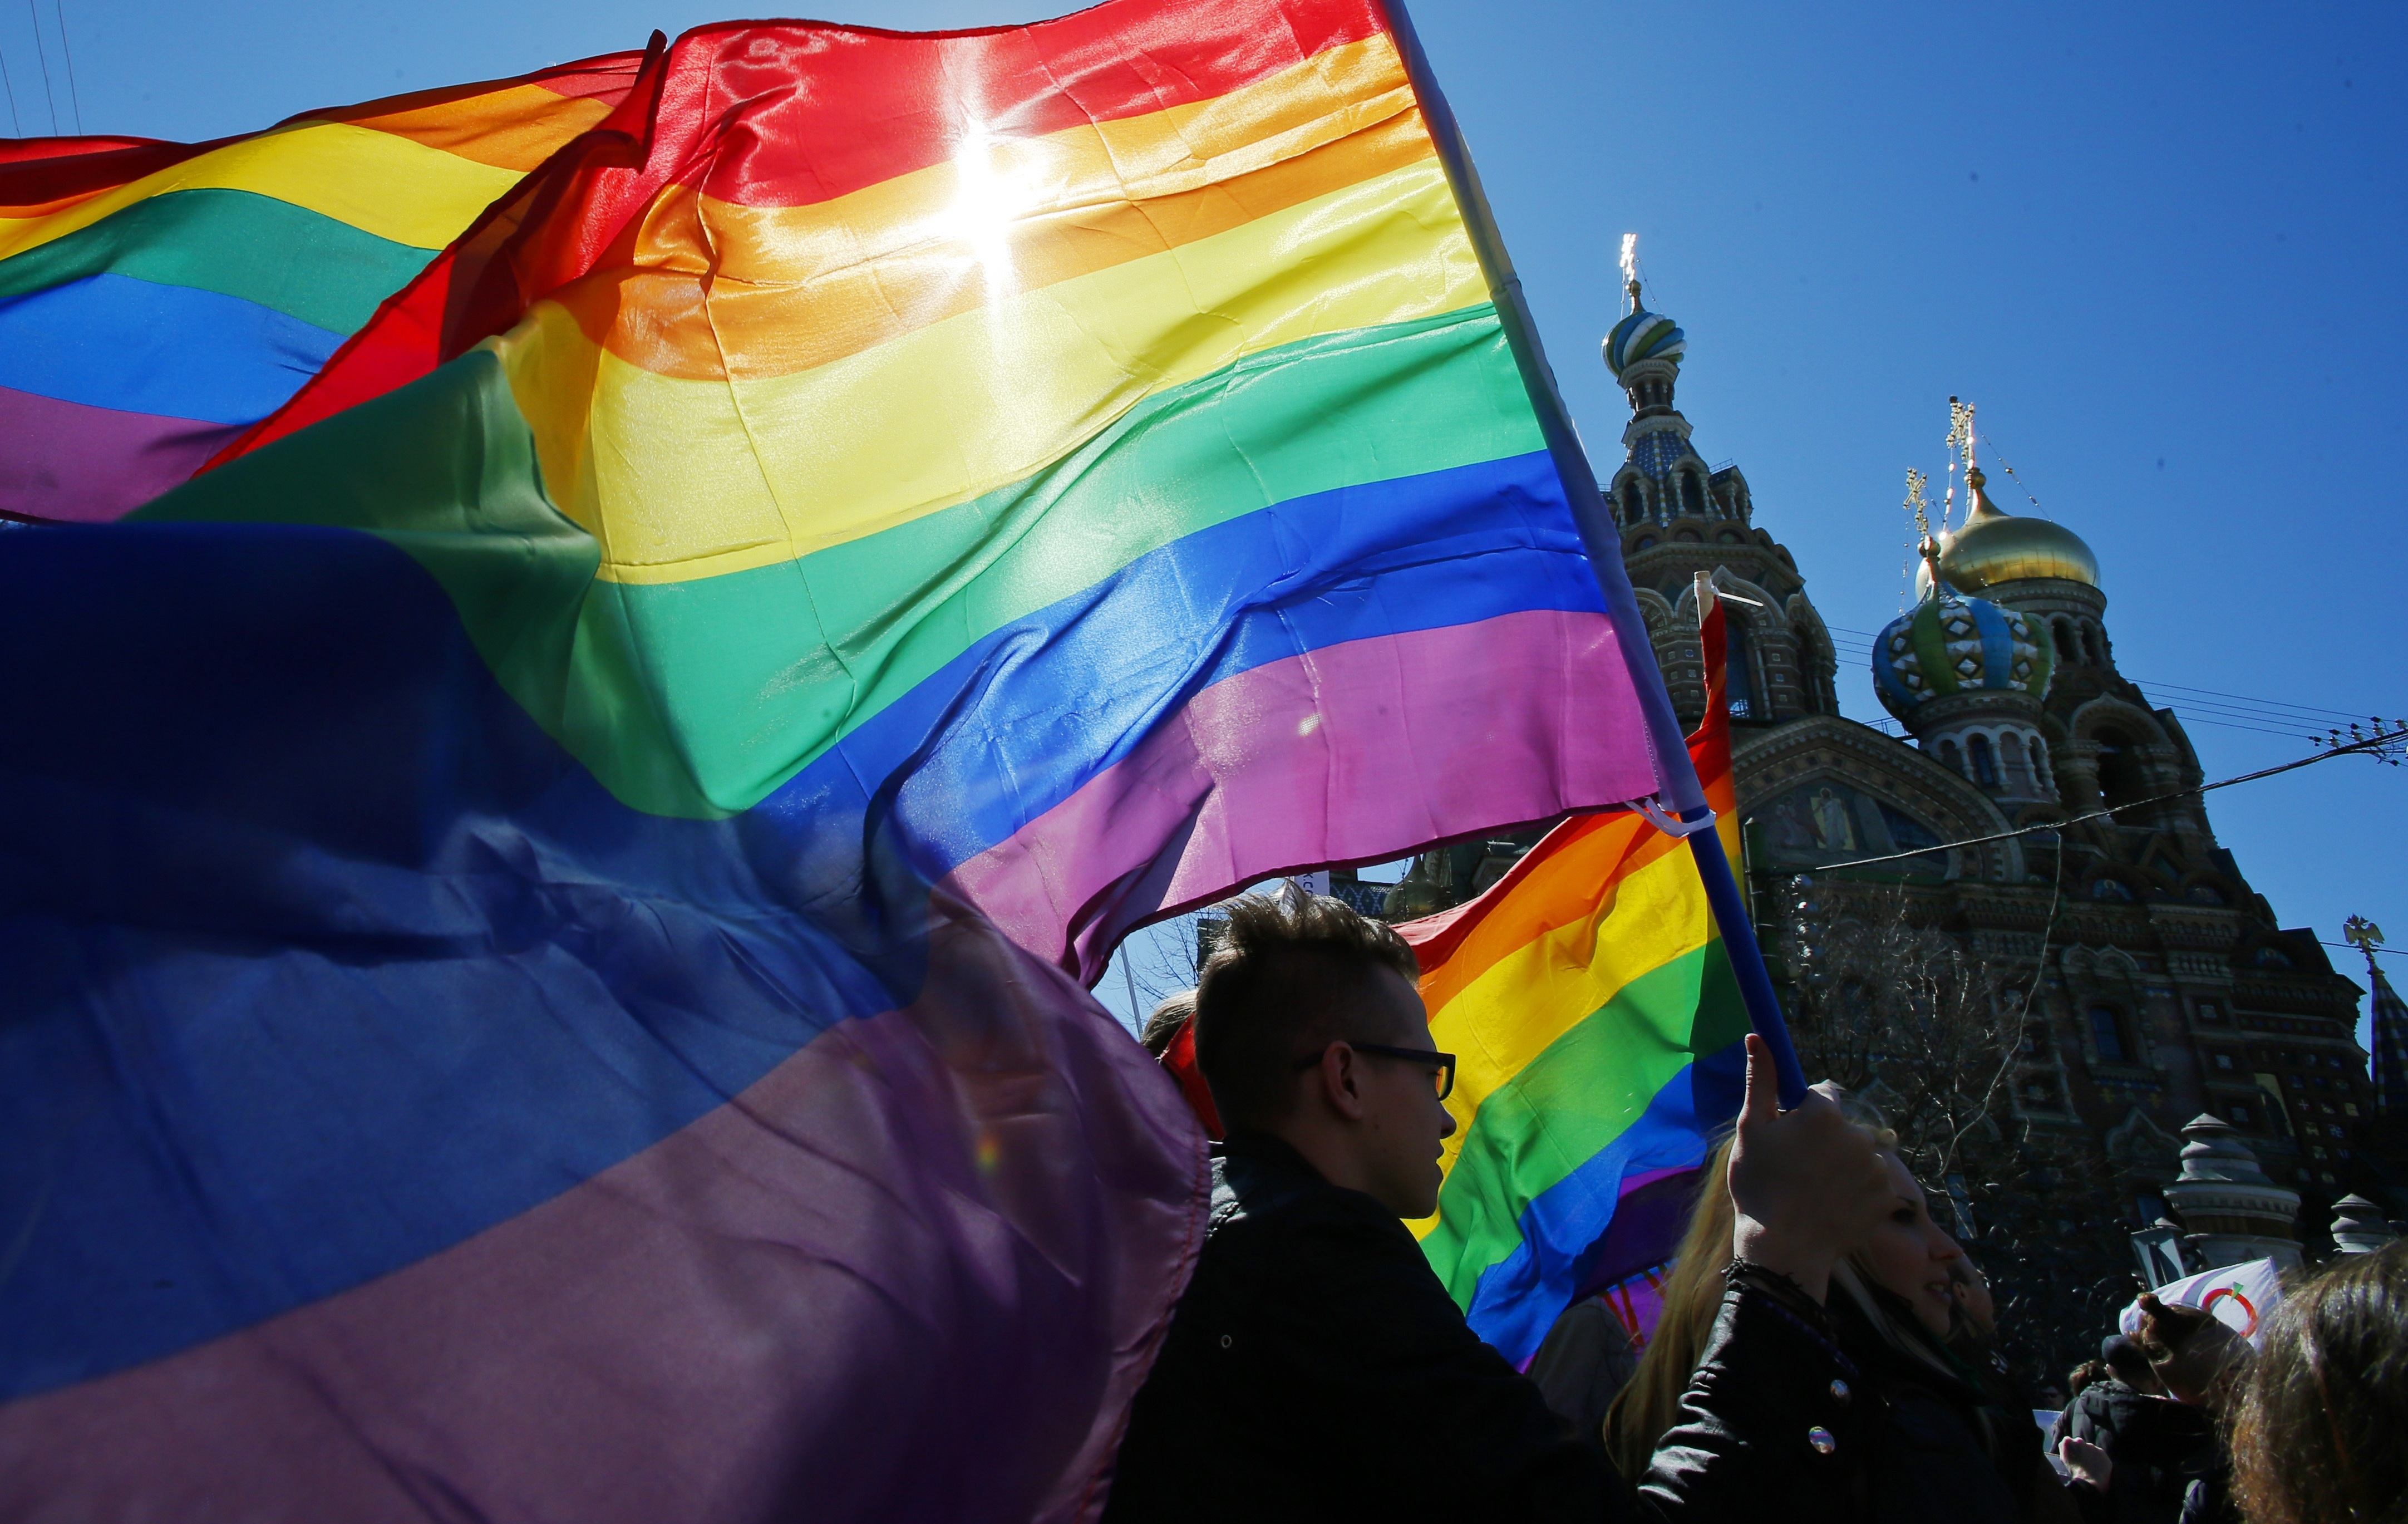 1 May 2013, Russia. LGBT rights activists take part in a rally in St. Petersburg.